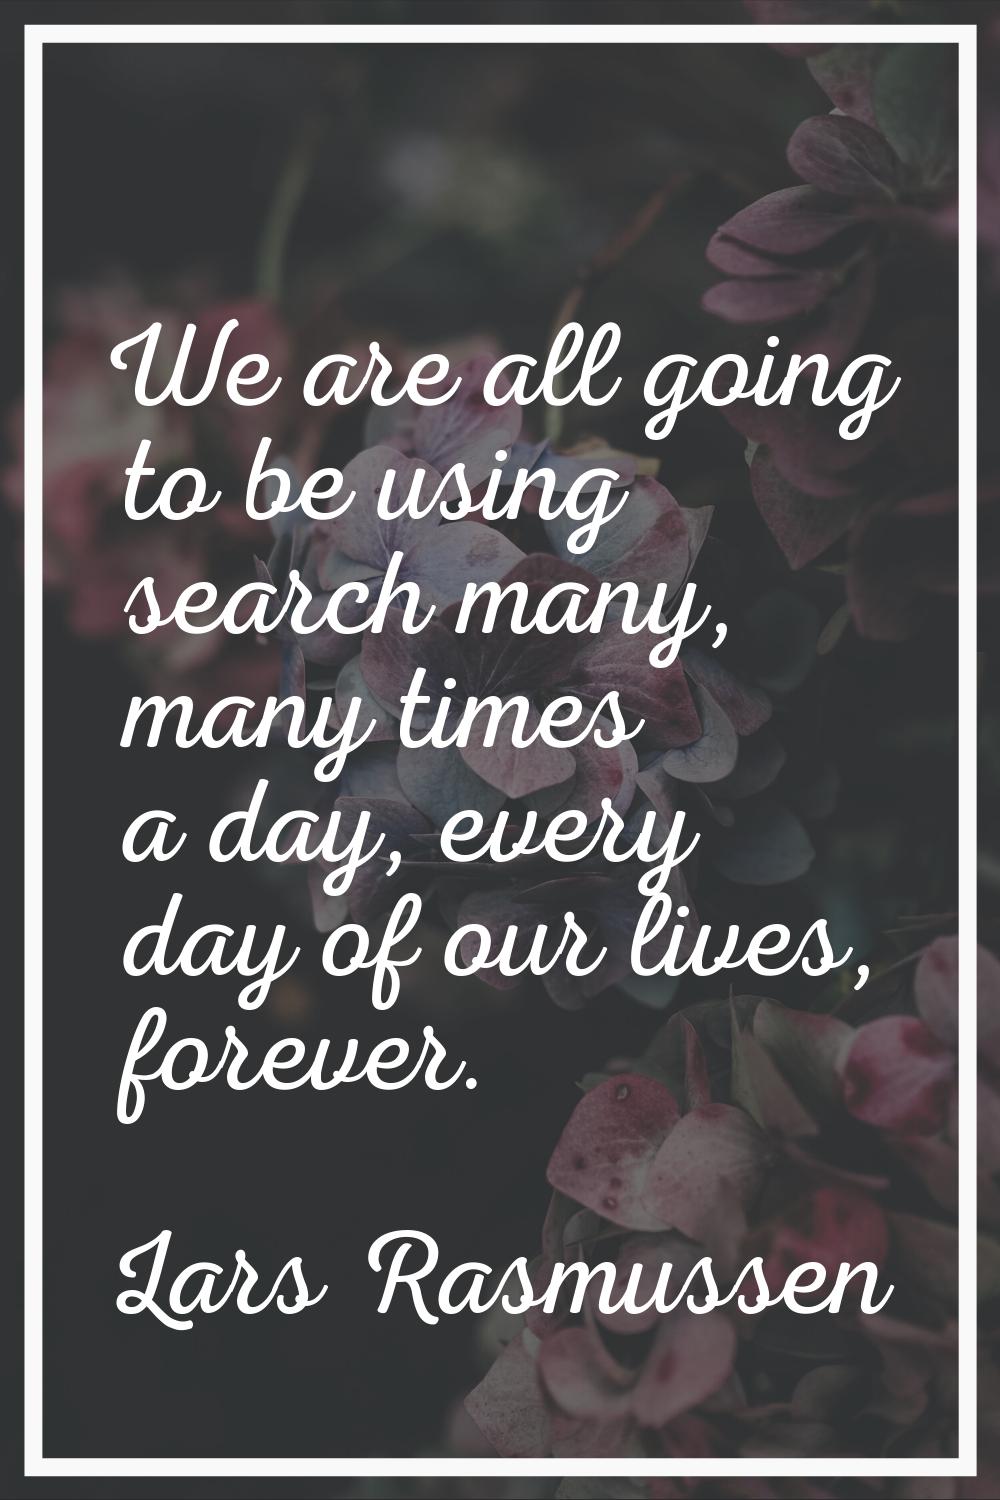 We are all going to be using search many, many times a day, every day of our lives, forever.